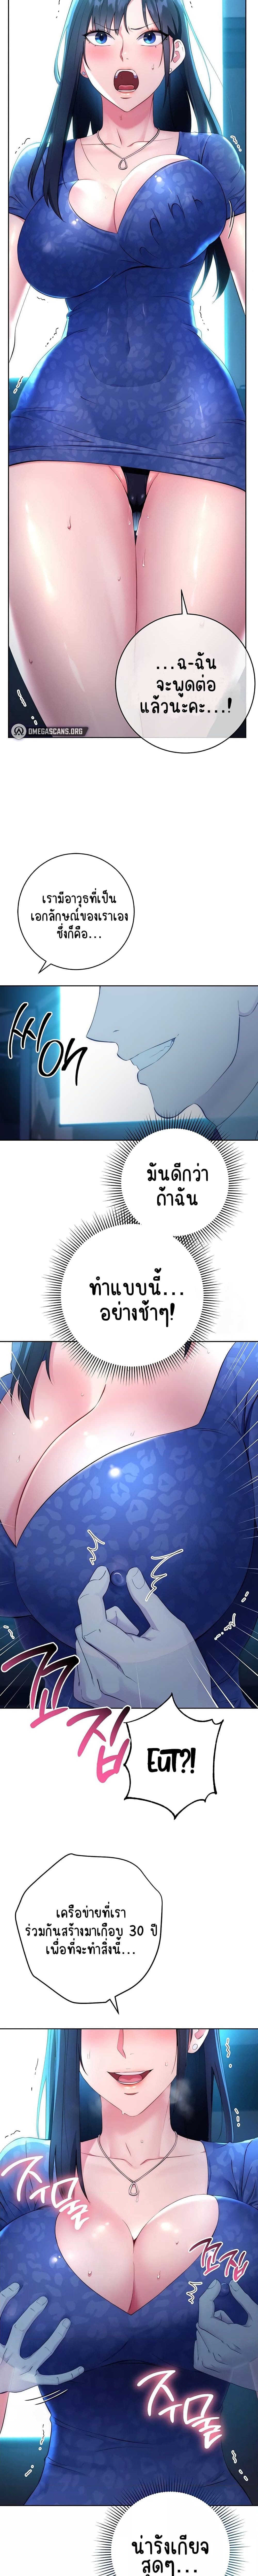 Outsider: The Invisible Man ตอนที่ 5 ภาพ 2